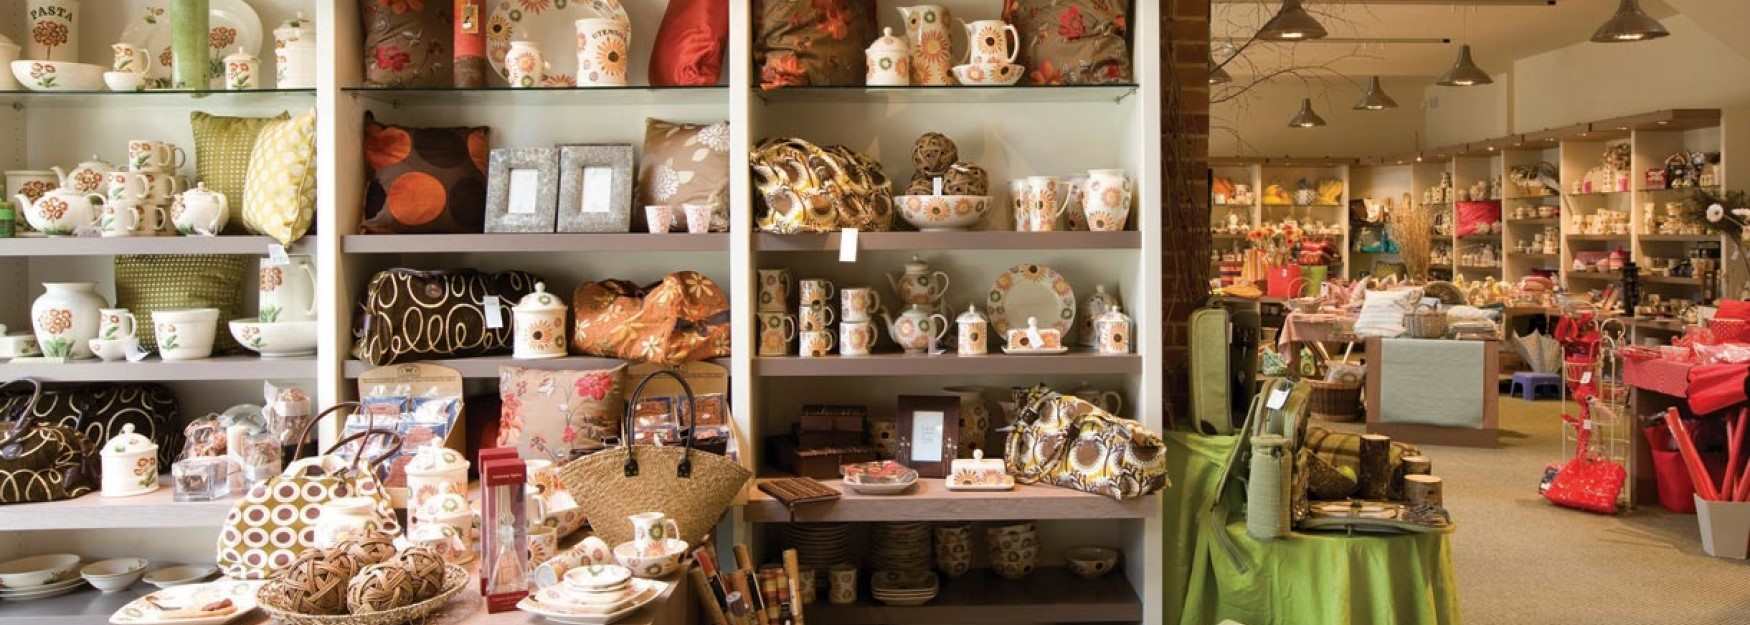 Home and interiors items on sale at Aston Pottery shop